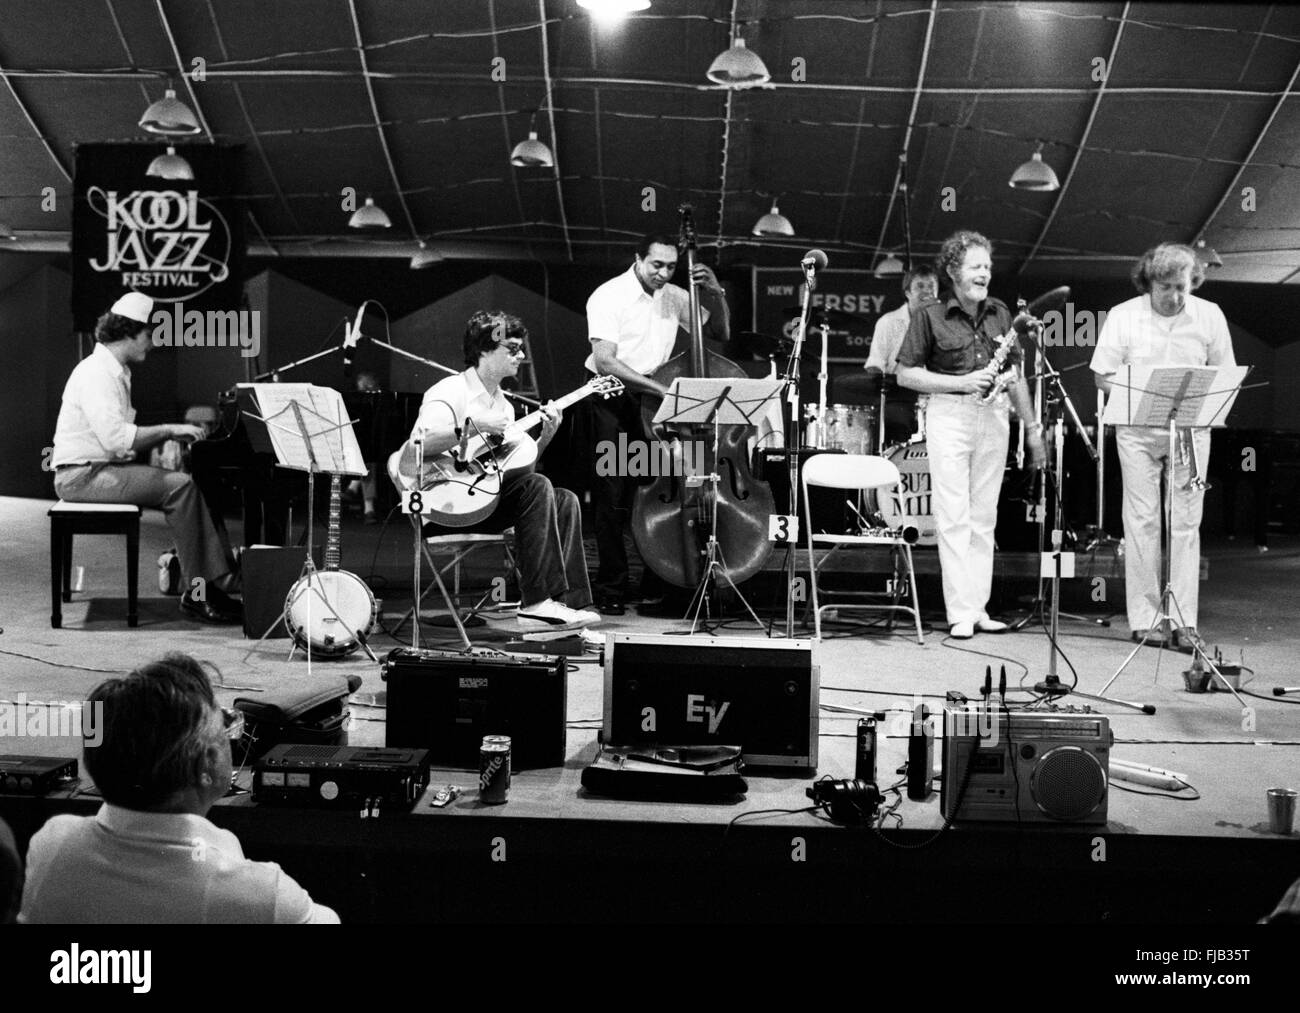 Bob Wilber on stage at the Kool Jazz Festival in Stanhope, New Jersey, June 1982. With him are Butch Miles on drums, Reggie Johnson on bass, Mike Canonico on trumpet, Mike Peters on guitar and possibly Mark Shane on piano. Stock Photo